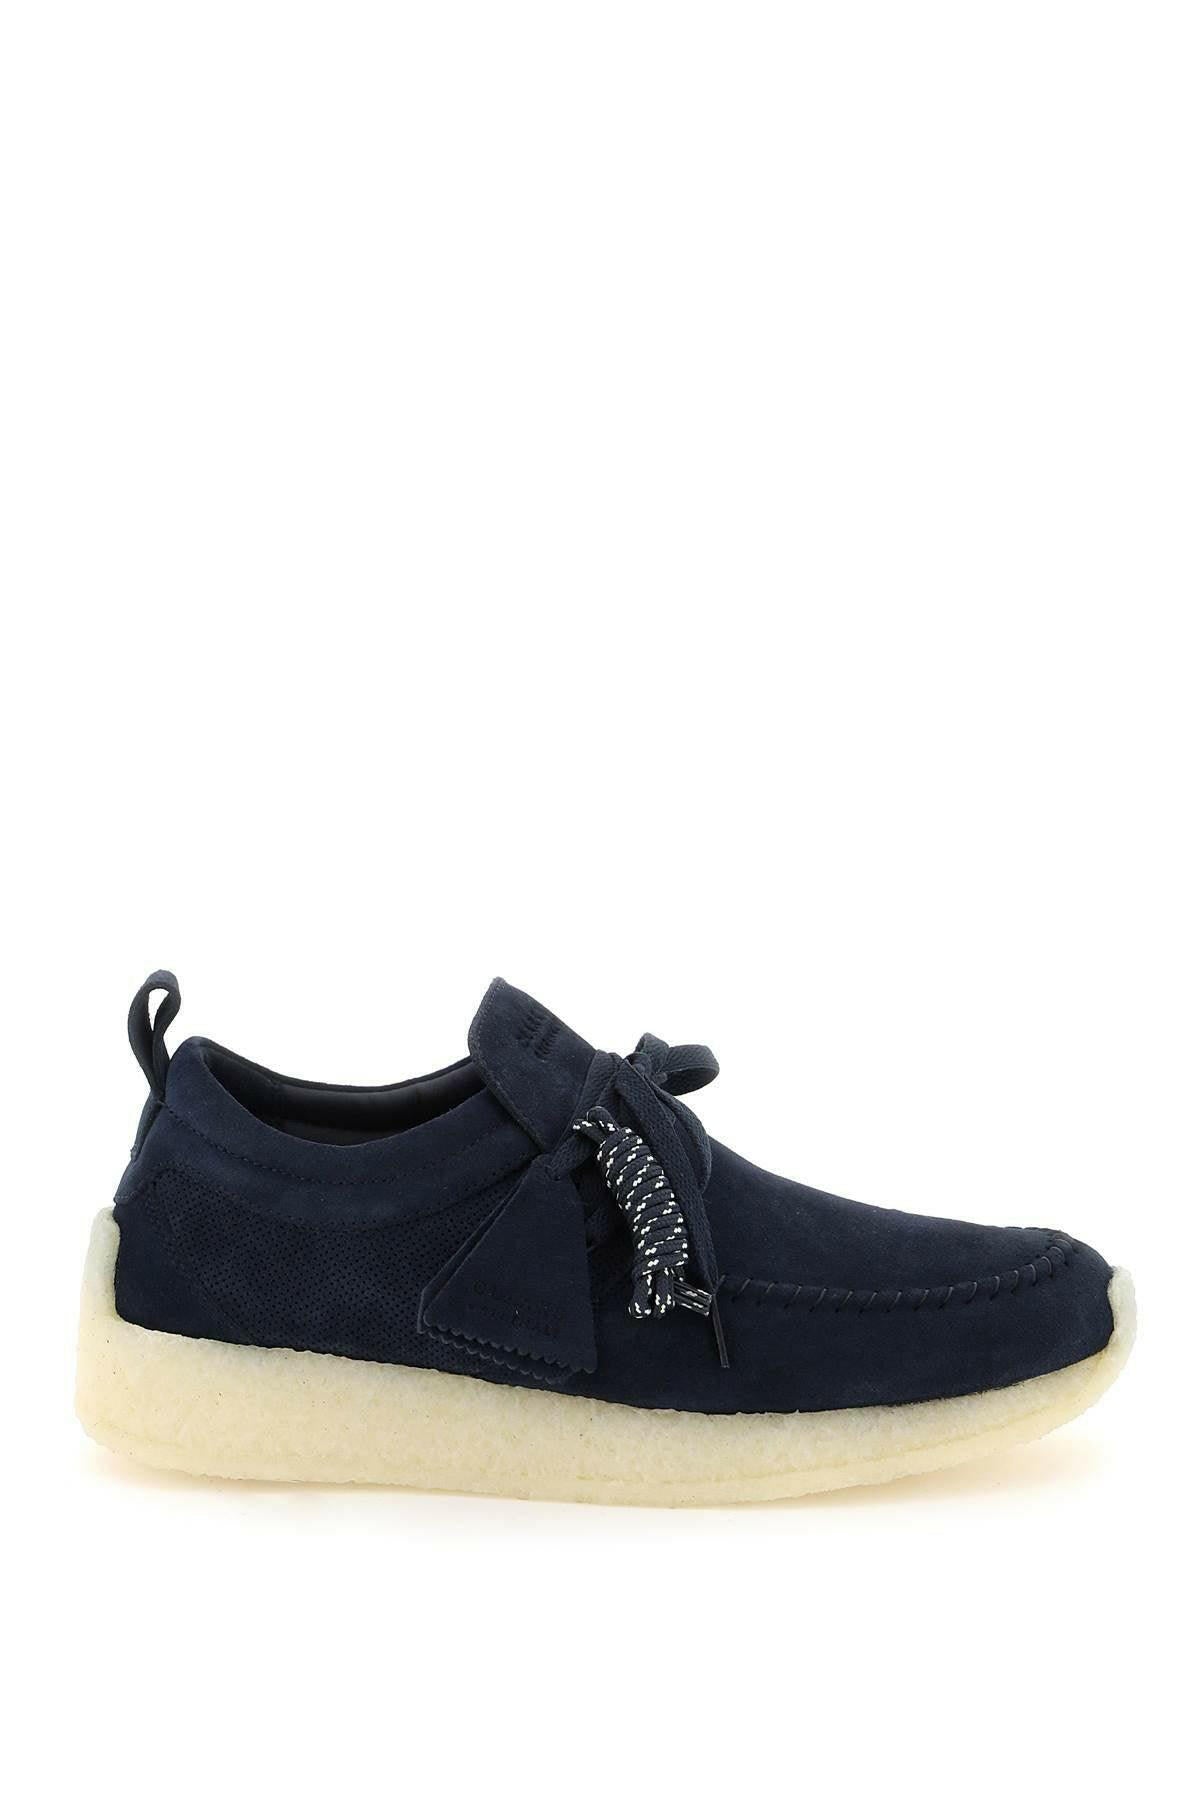 Ronnie Fieg X Clarks 'Maycliffe' Lace Up Shoes - JOHN JULIA